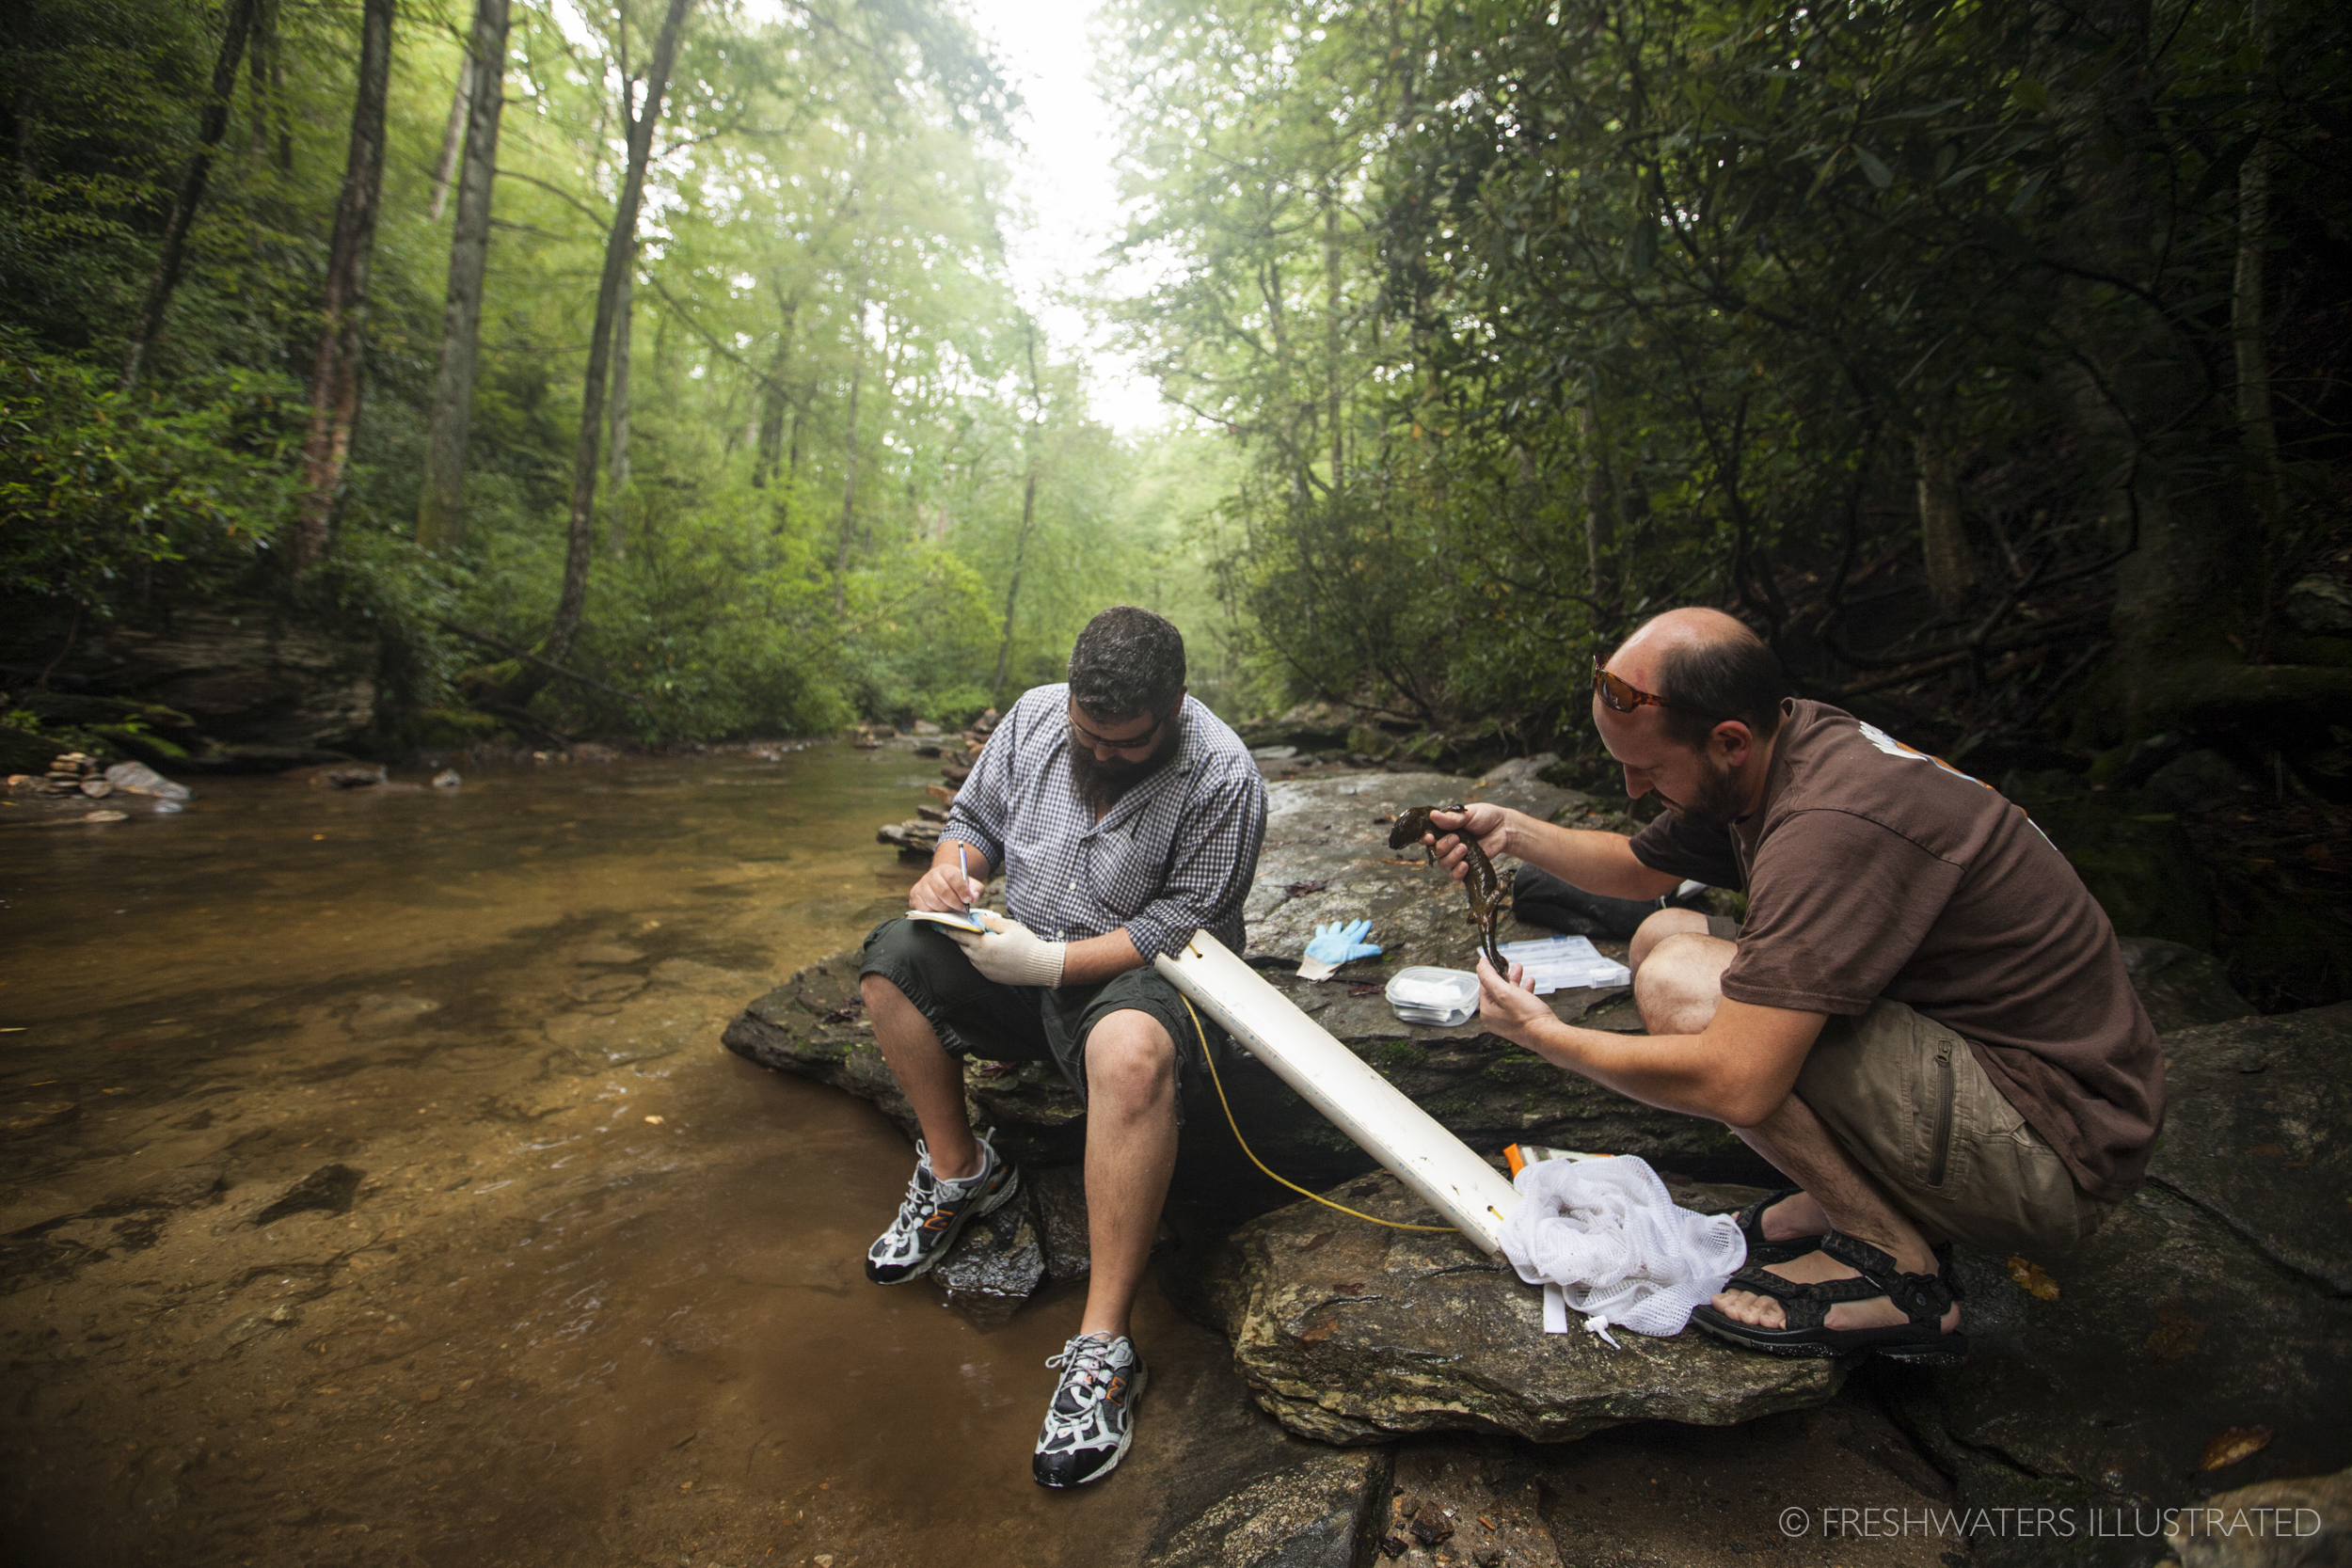  Biologists Jeff Humphries and Mike Sisson record and measure information on an Eastern Hellbender (Cryptobranchus alleganiensis) in a Southern Appalachian stream. North Carolina  www.FreshwatersIllustrated.org  